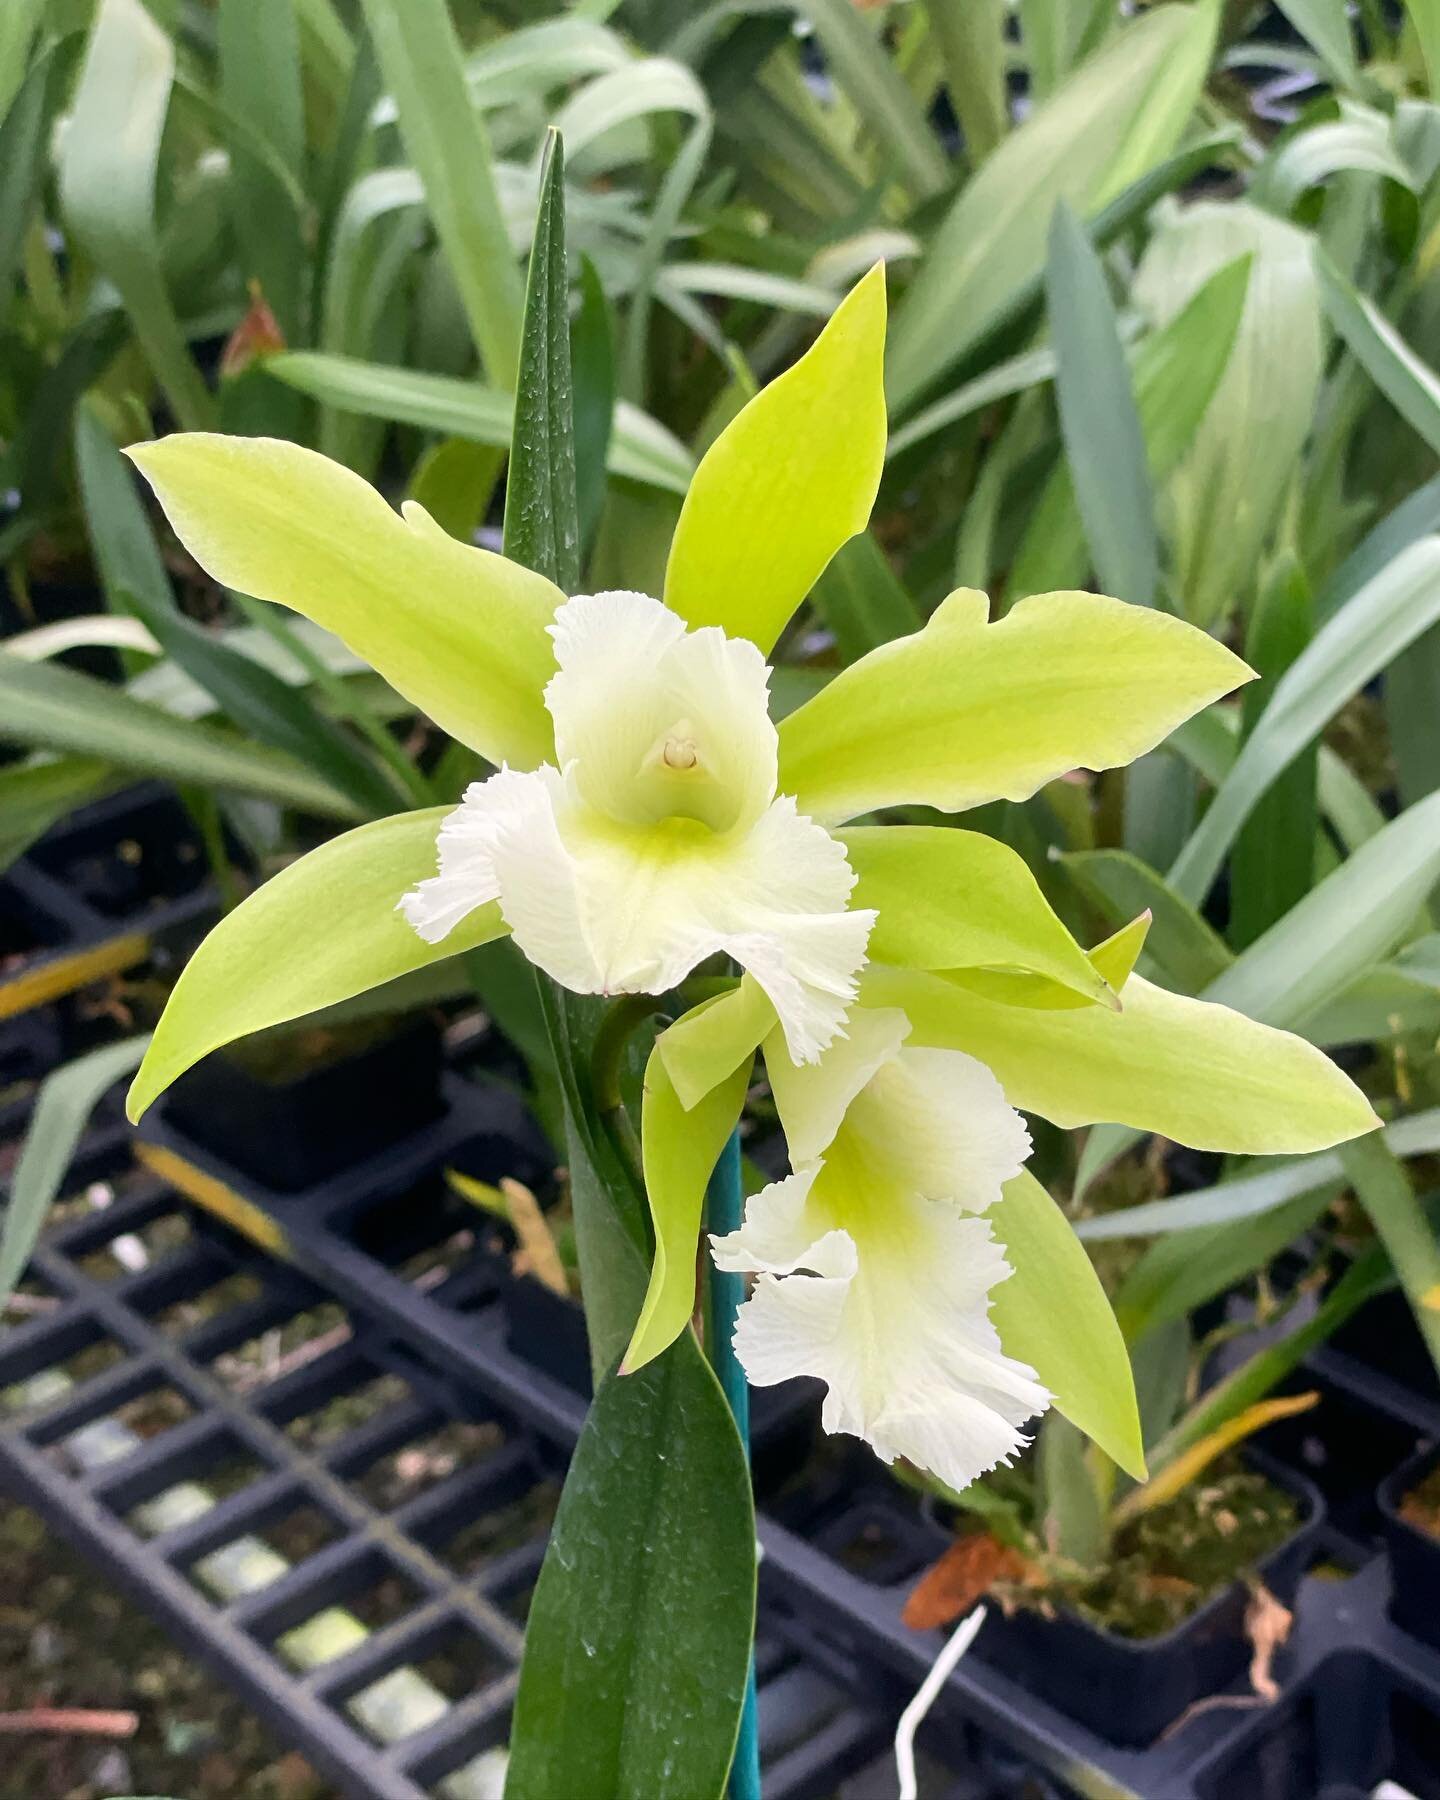 Something special&rsquo;s starting to bloom! Pry. Muscat Smile &lsquo;Green Mountain&rsquo; with it&rsquo;s huge flowers and subtly sweet fragrance is here to remind us that spring is near. 

#orchid #orchids #bloomingorchid #greenorchid #orchidshare